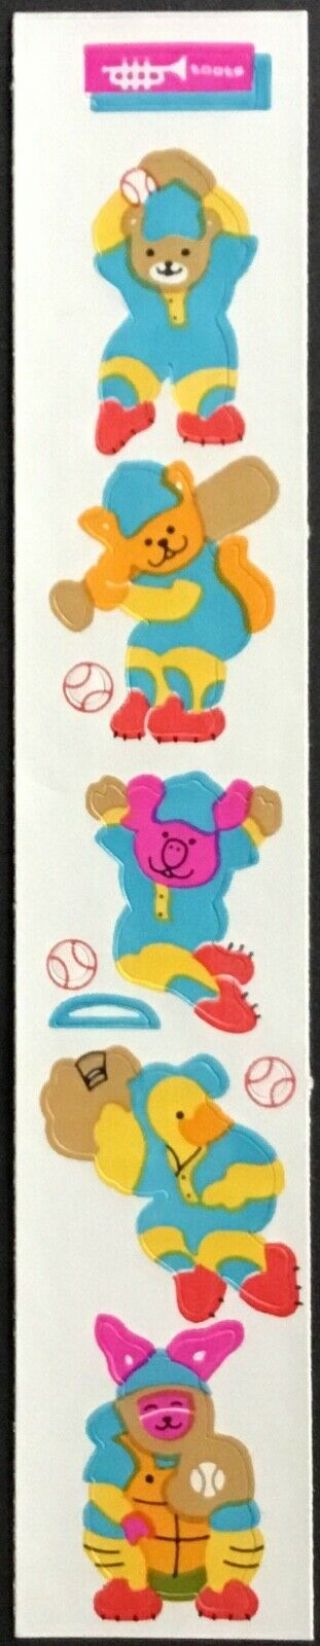 Vintage Stickers - Cardesign Toots - Play Ball - Dated 1984